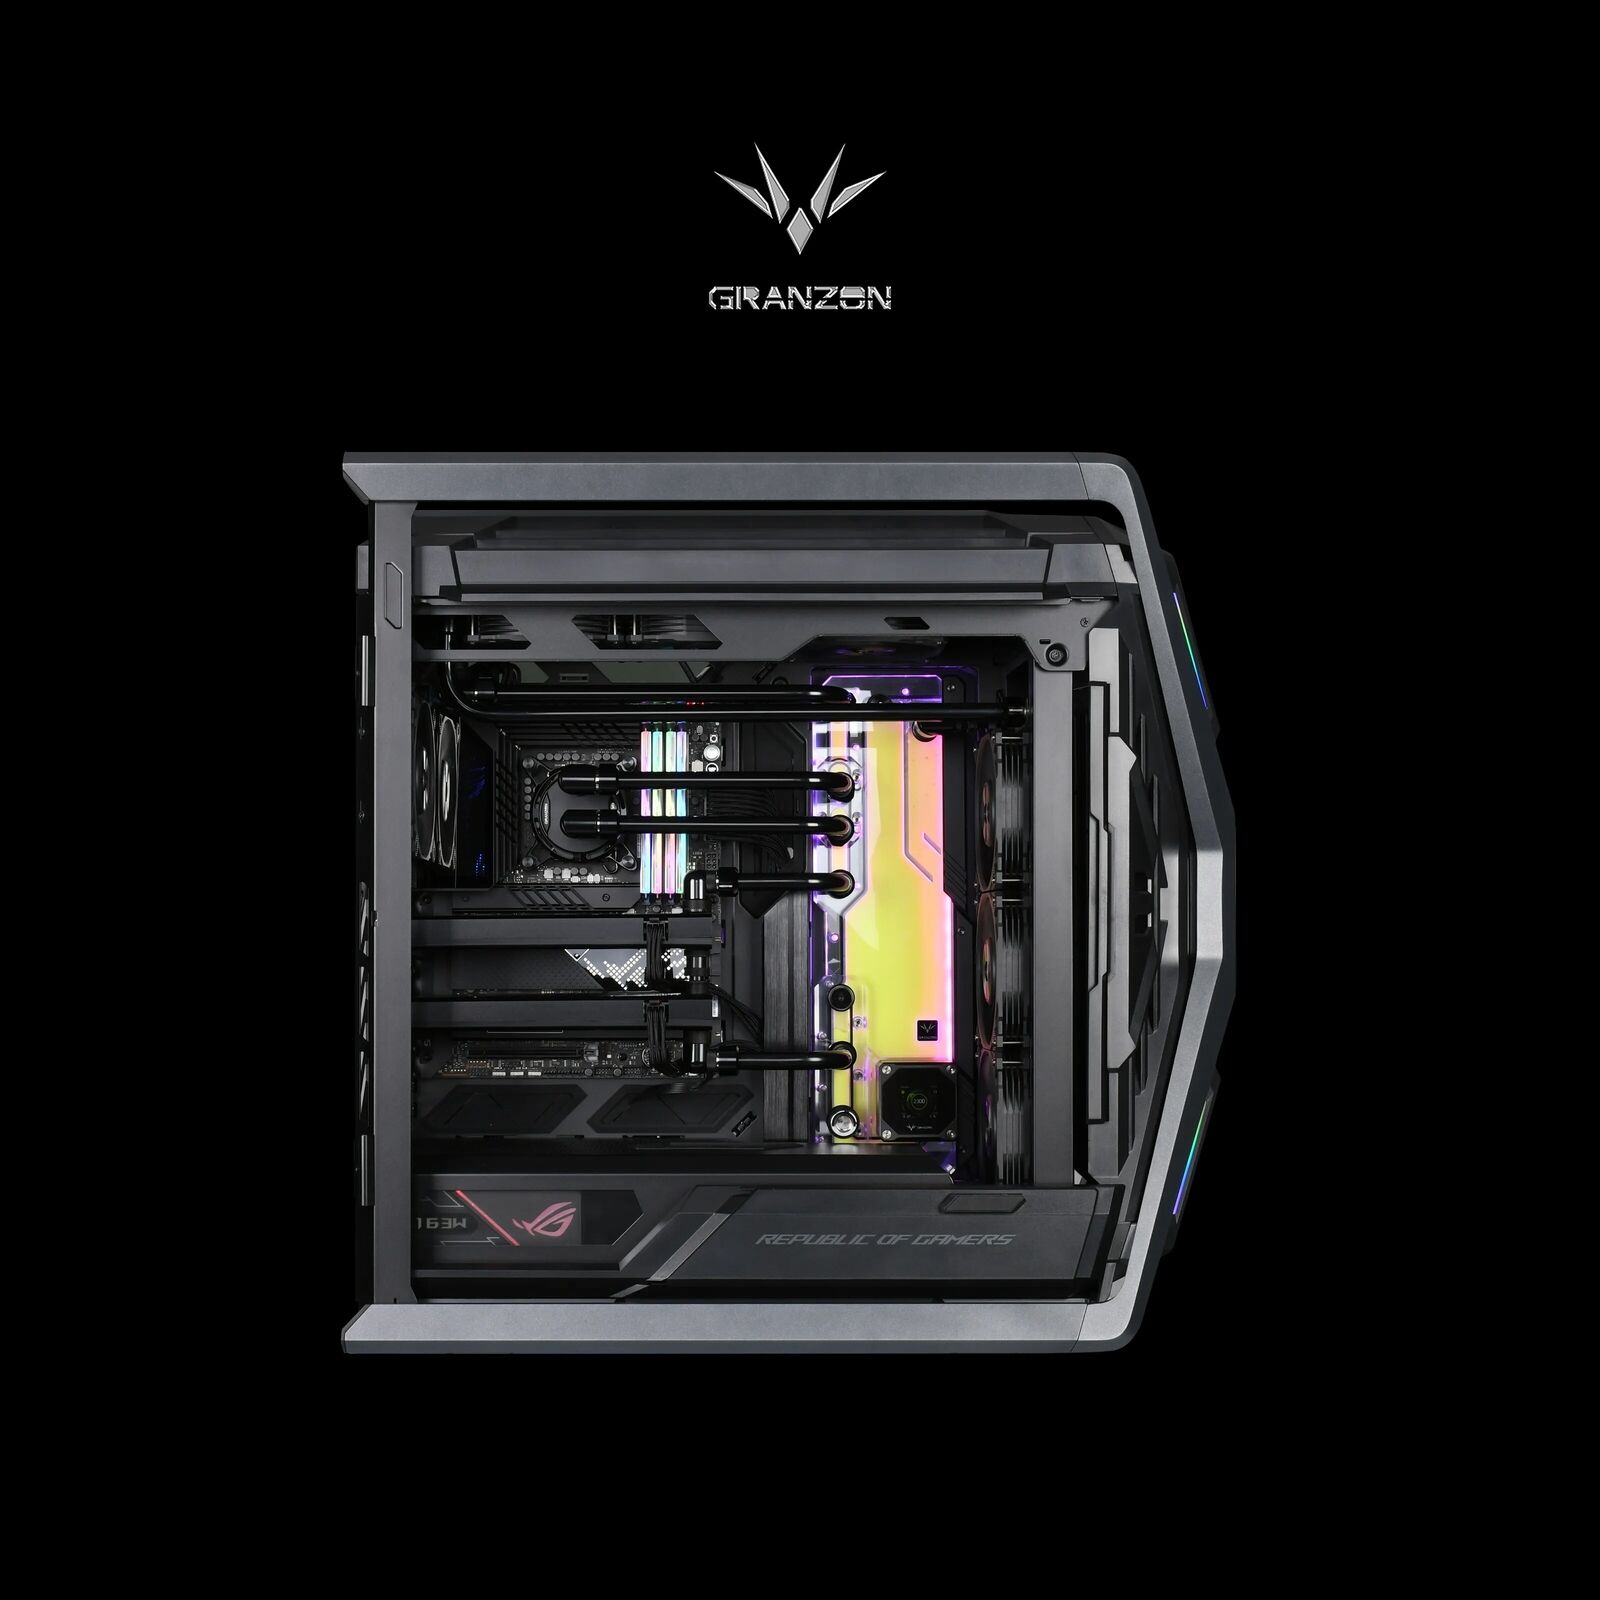 Granzon Acrylic Distro Plate Kit For ASUS ROG Hyperion GR701 Computer Case